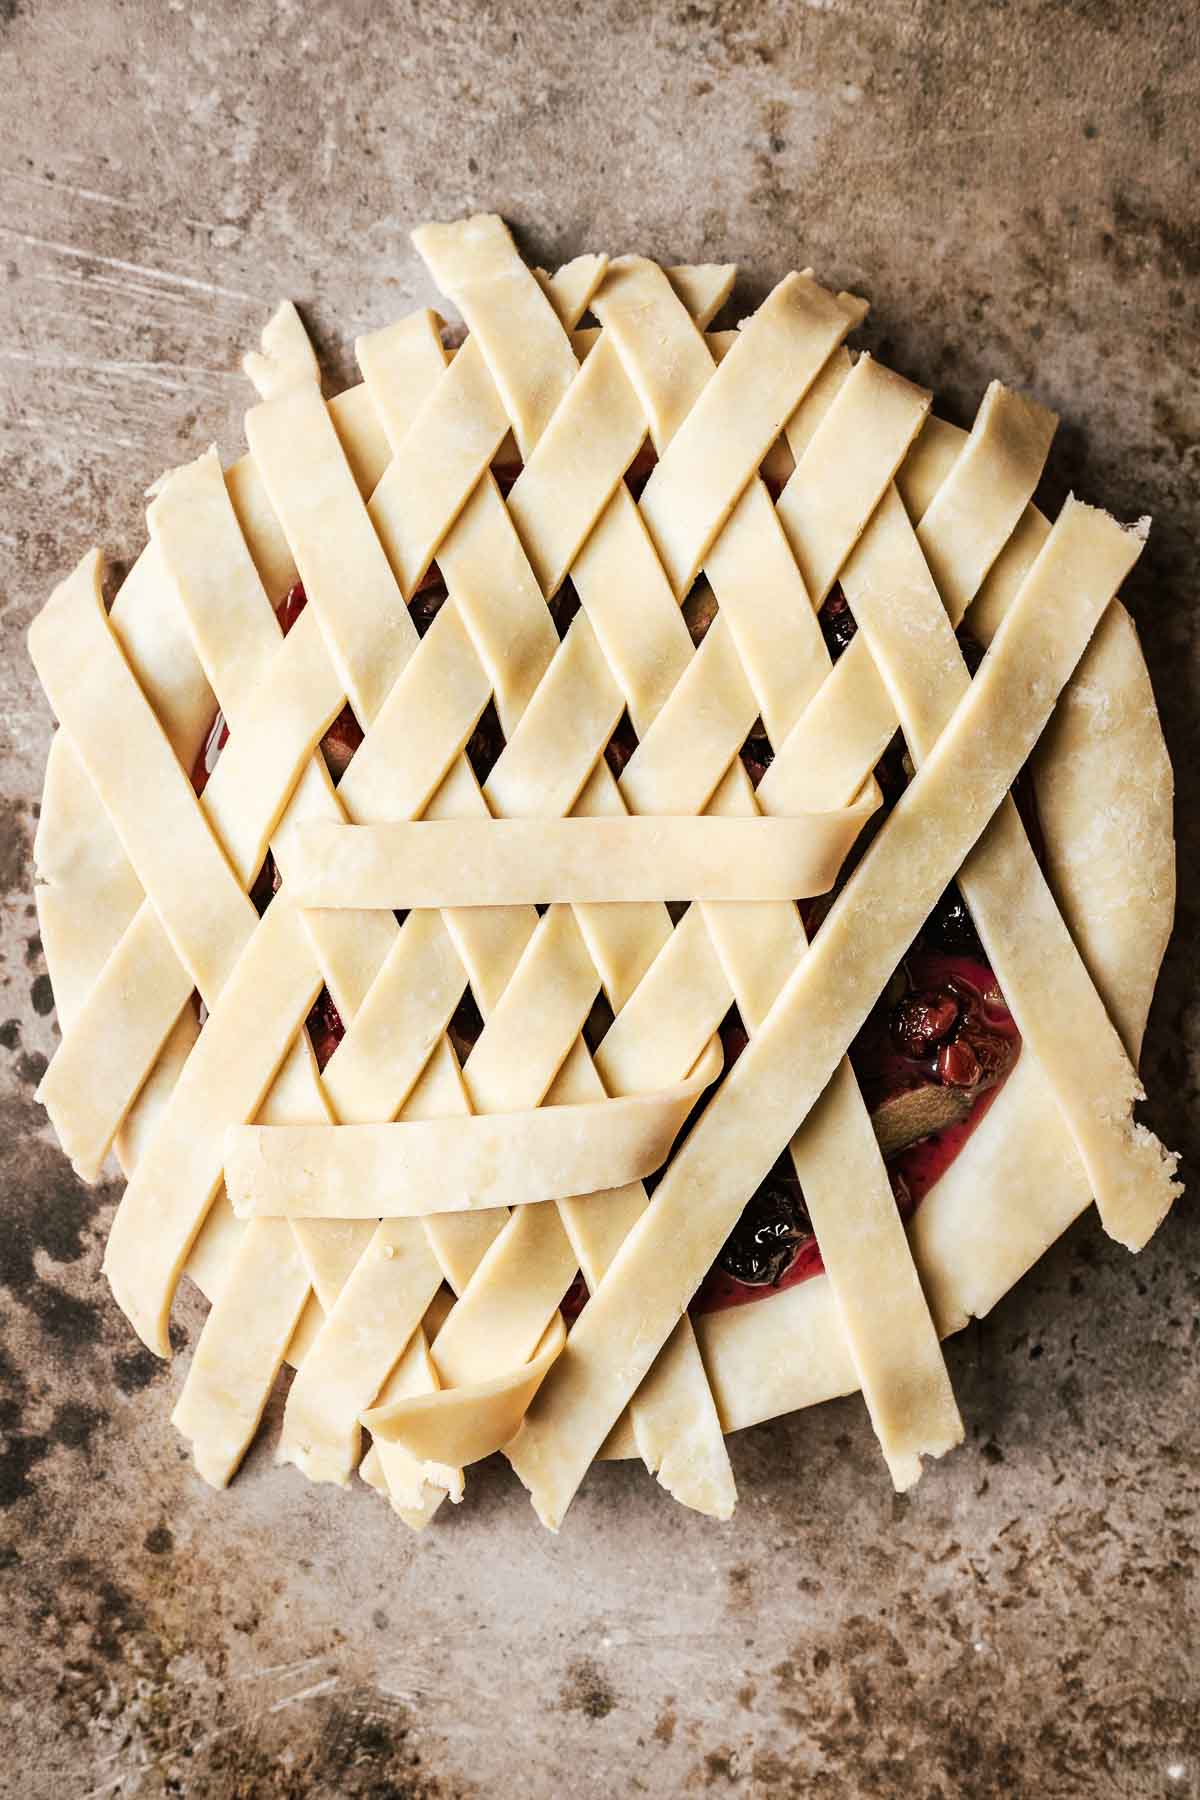 A filled cherry rhubarb pie with lattice pieces being woven on top.